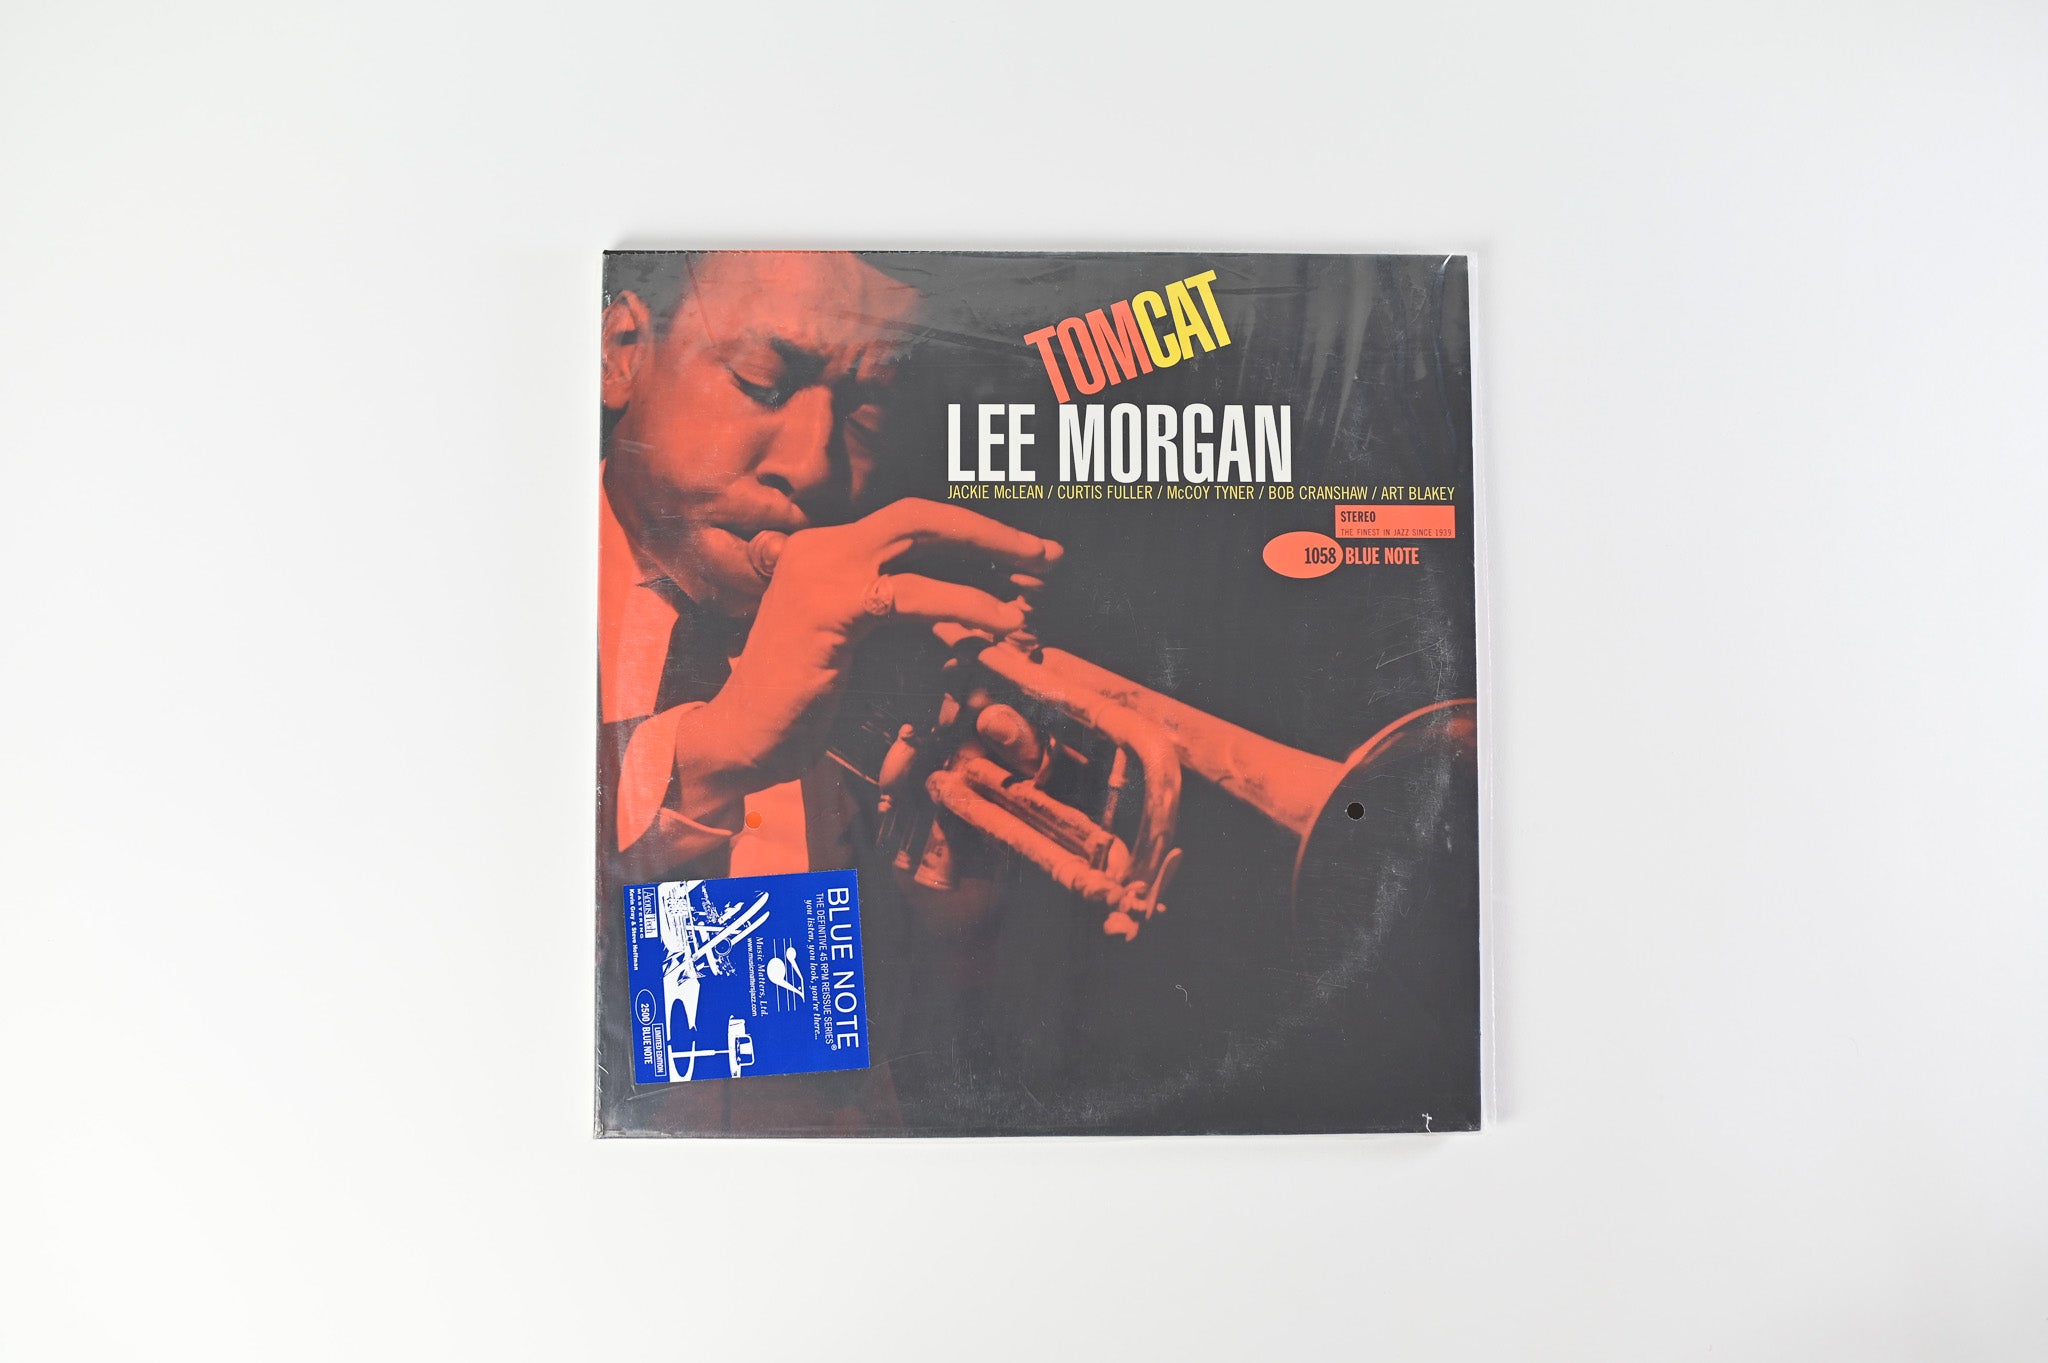 Lee Morgan - Tom Cat on Blue Note Music Matters Ltd Numbered Reissue 45 RPM